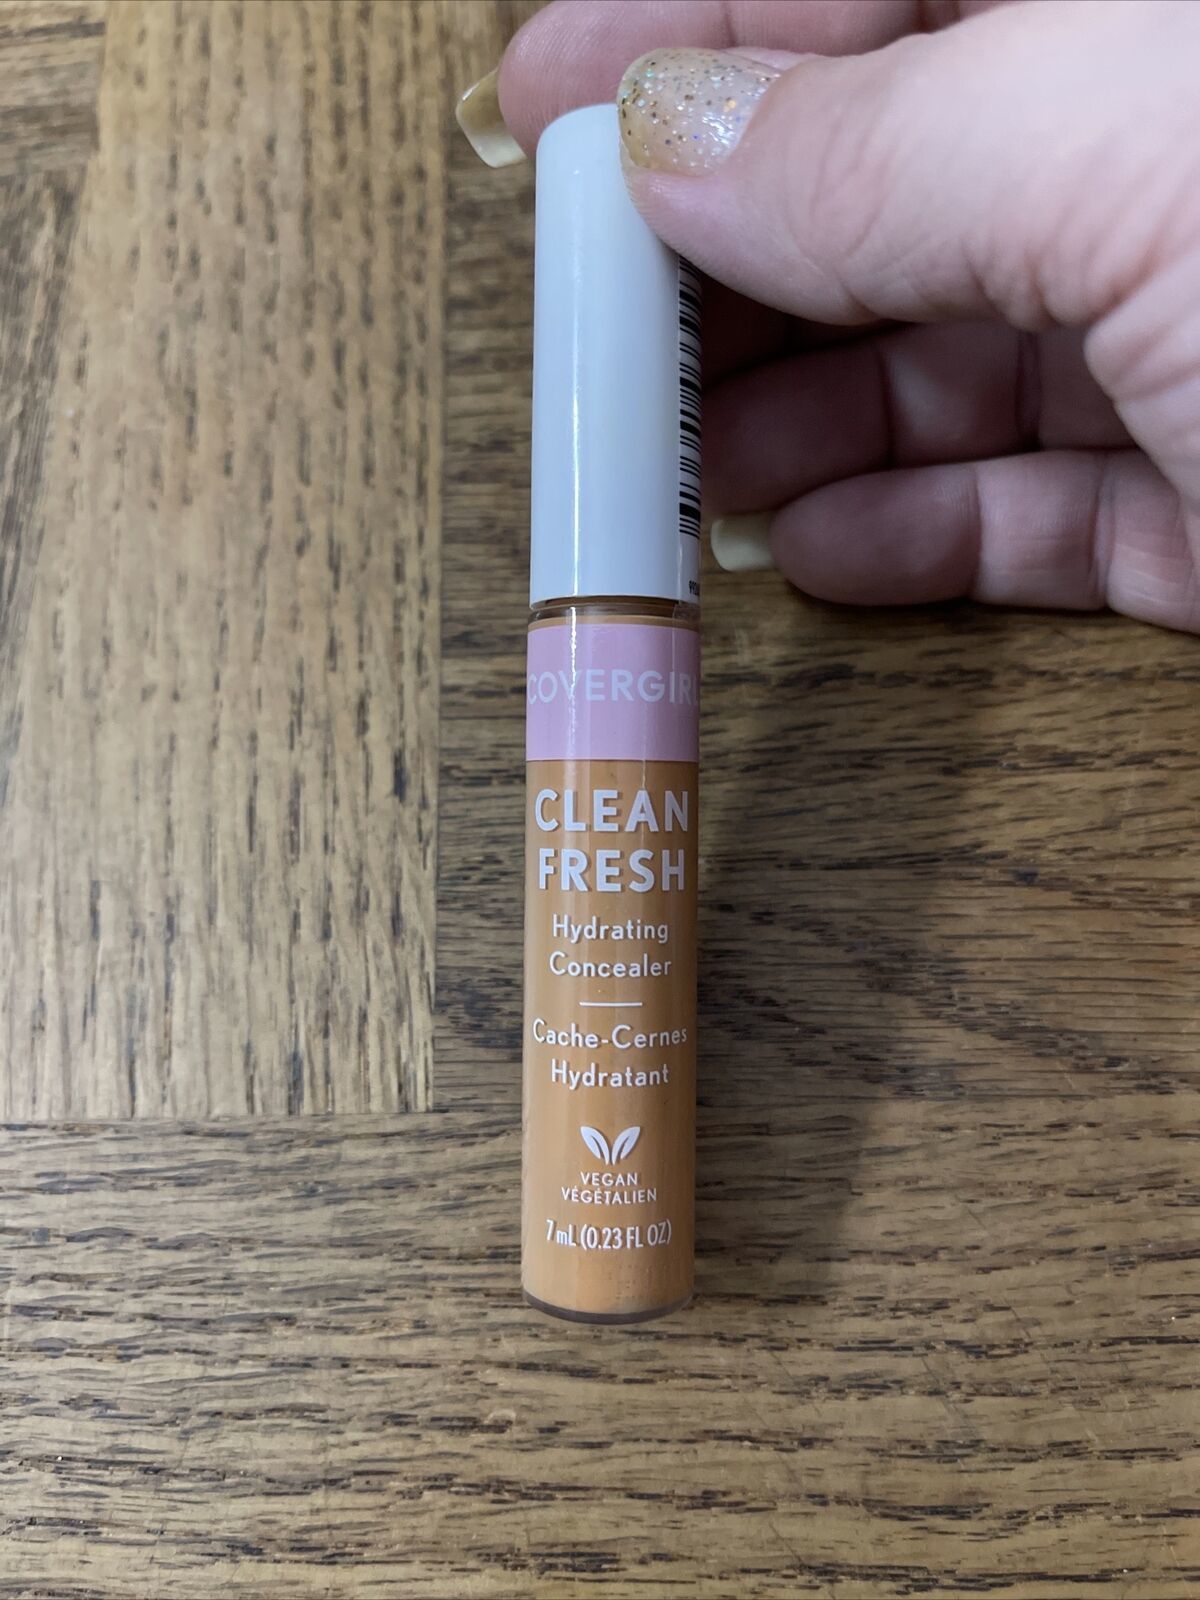 Primary image for Covergirl Clean Fresh Concealer Tan